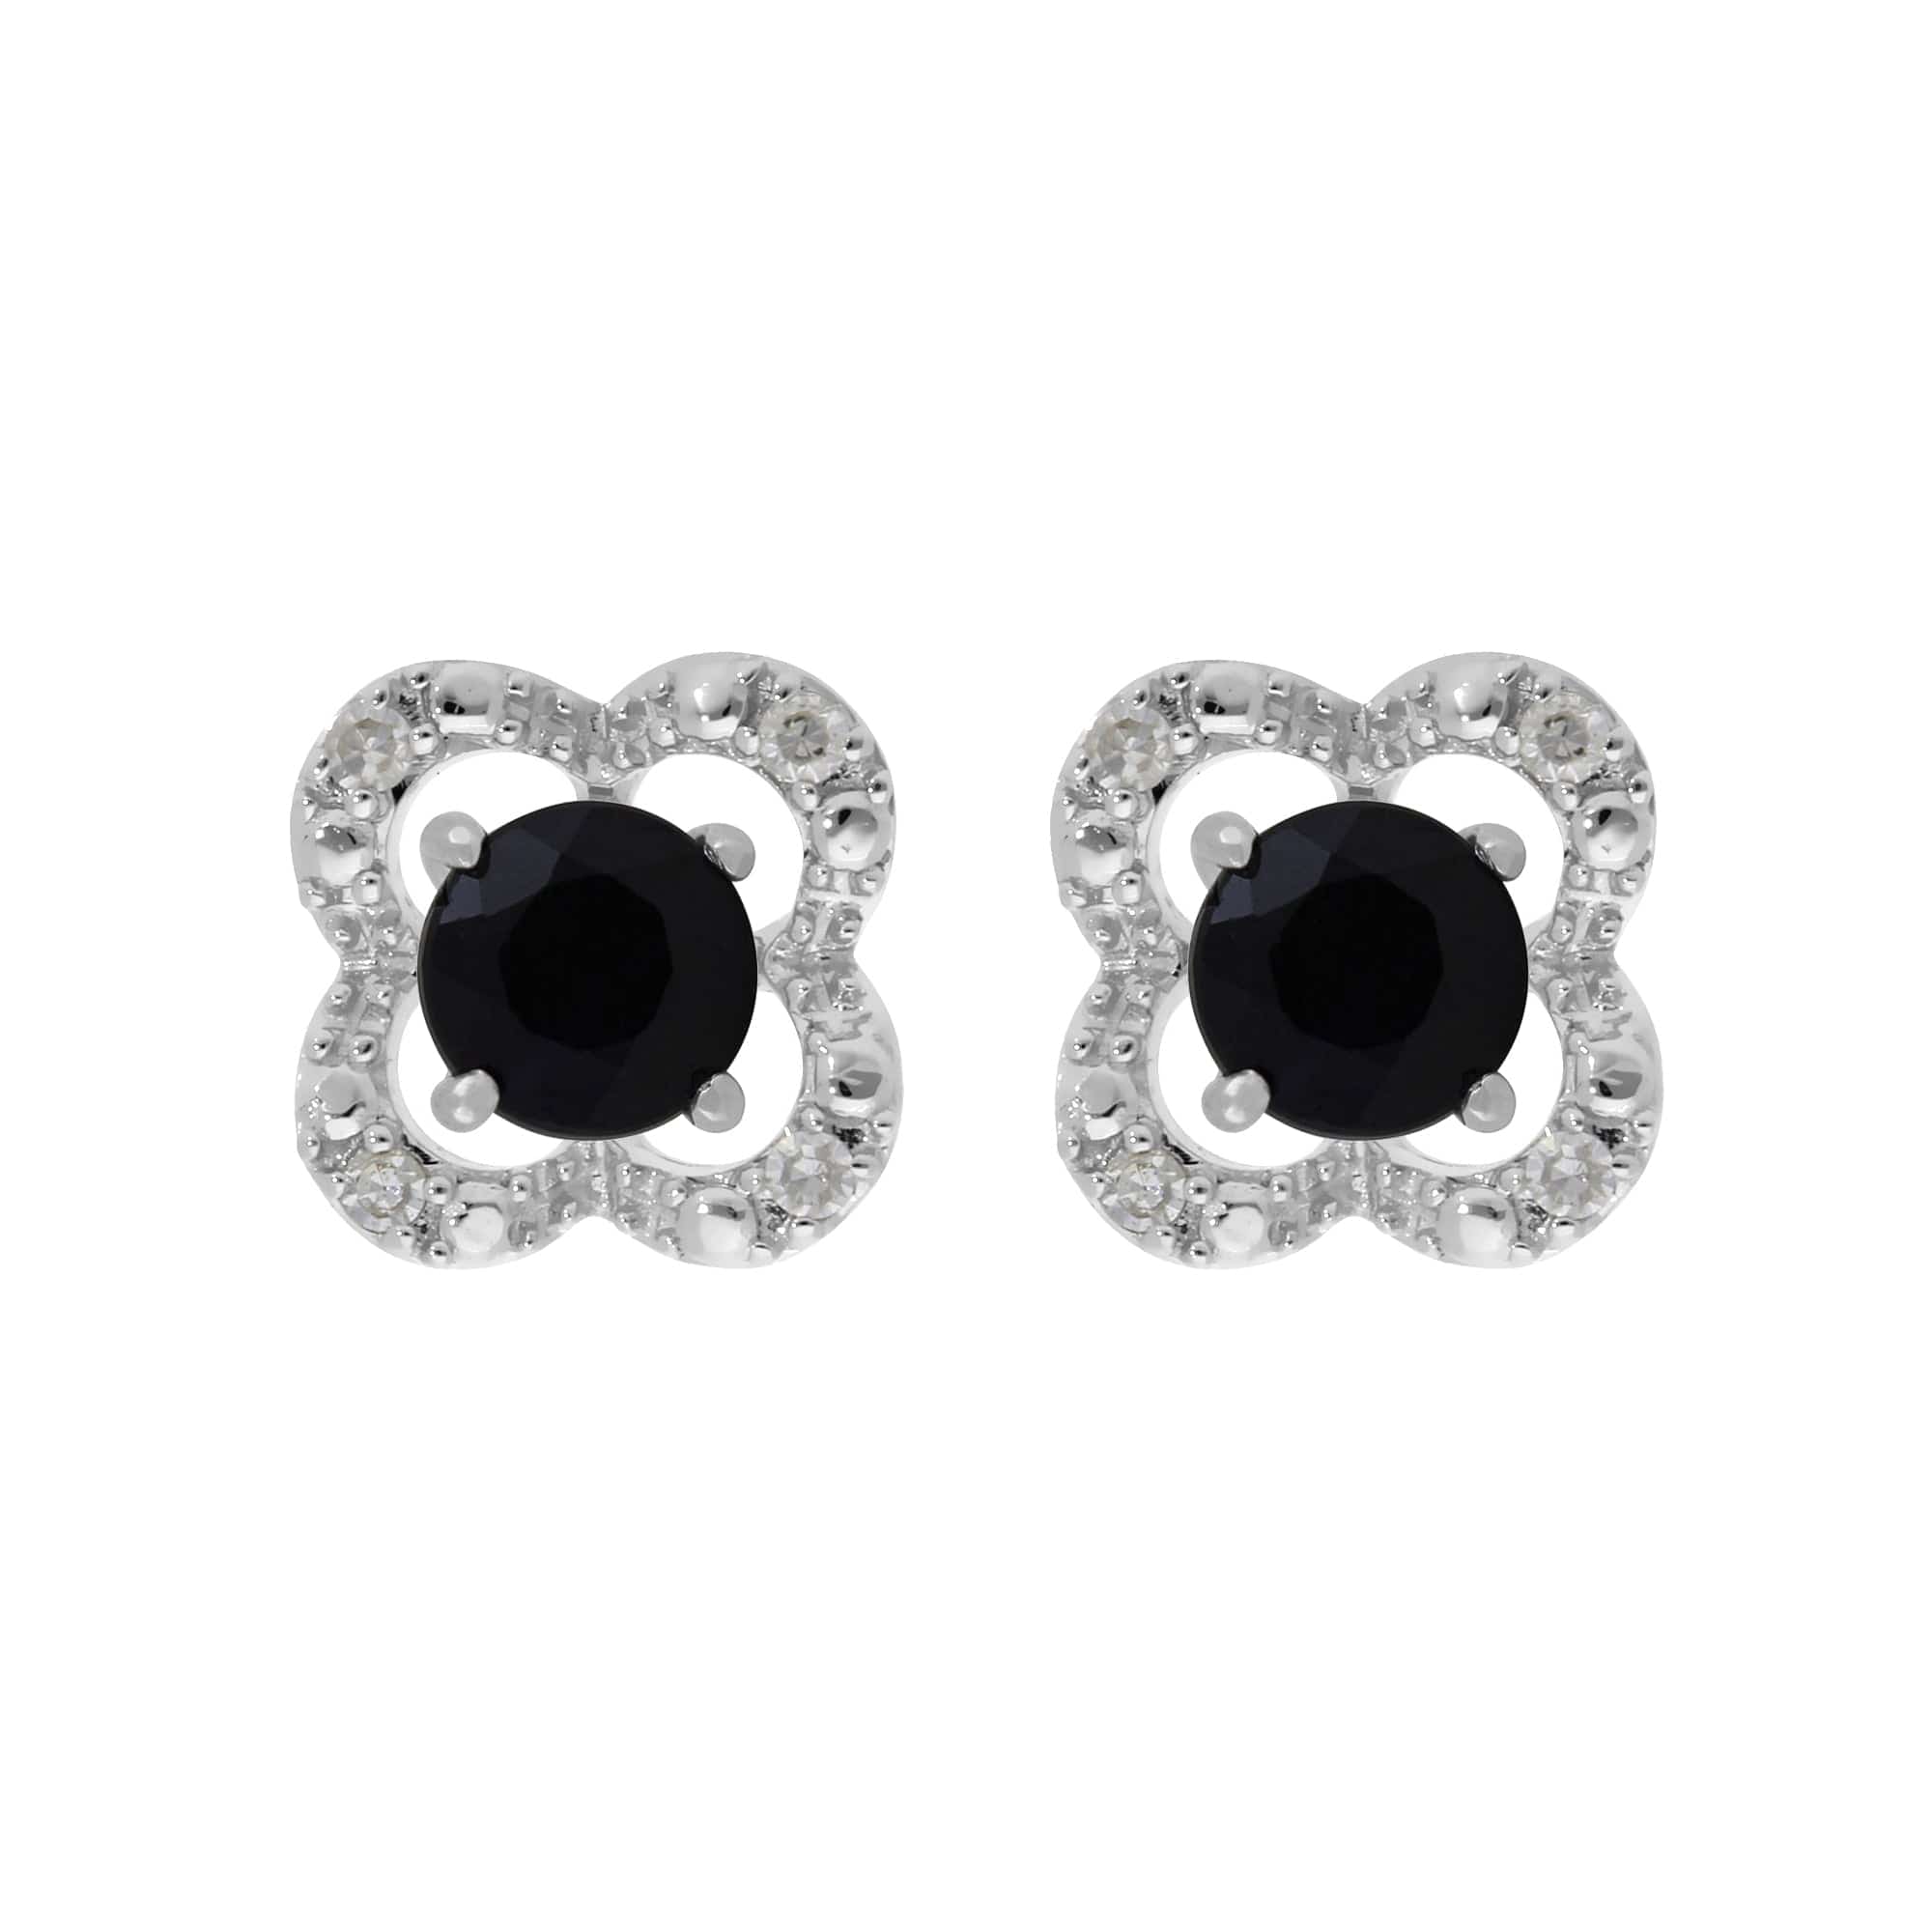 25167-162E0244019 Classic Round Dark Blue Sapphire Studs with Detachable Diamond Flower Ear Jacket in 9ct White Gold 1